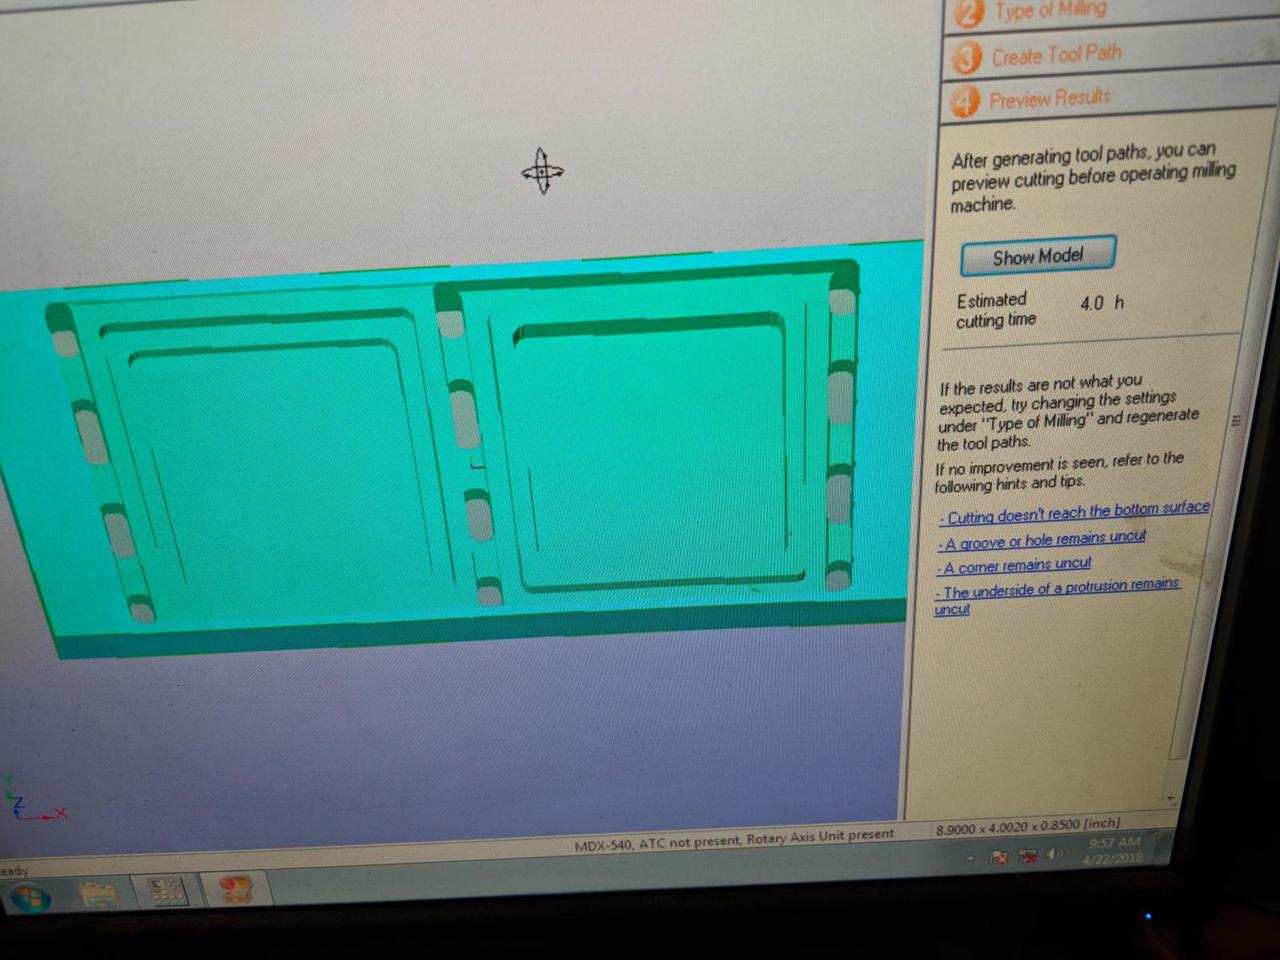 computer monitor showing the milling software estimating 4 hours to mill project